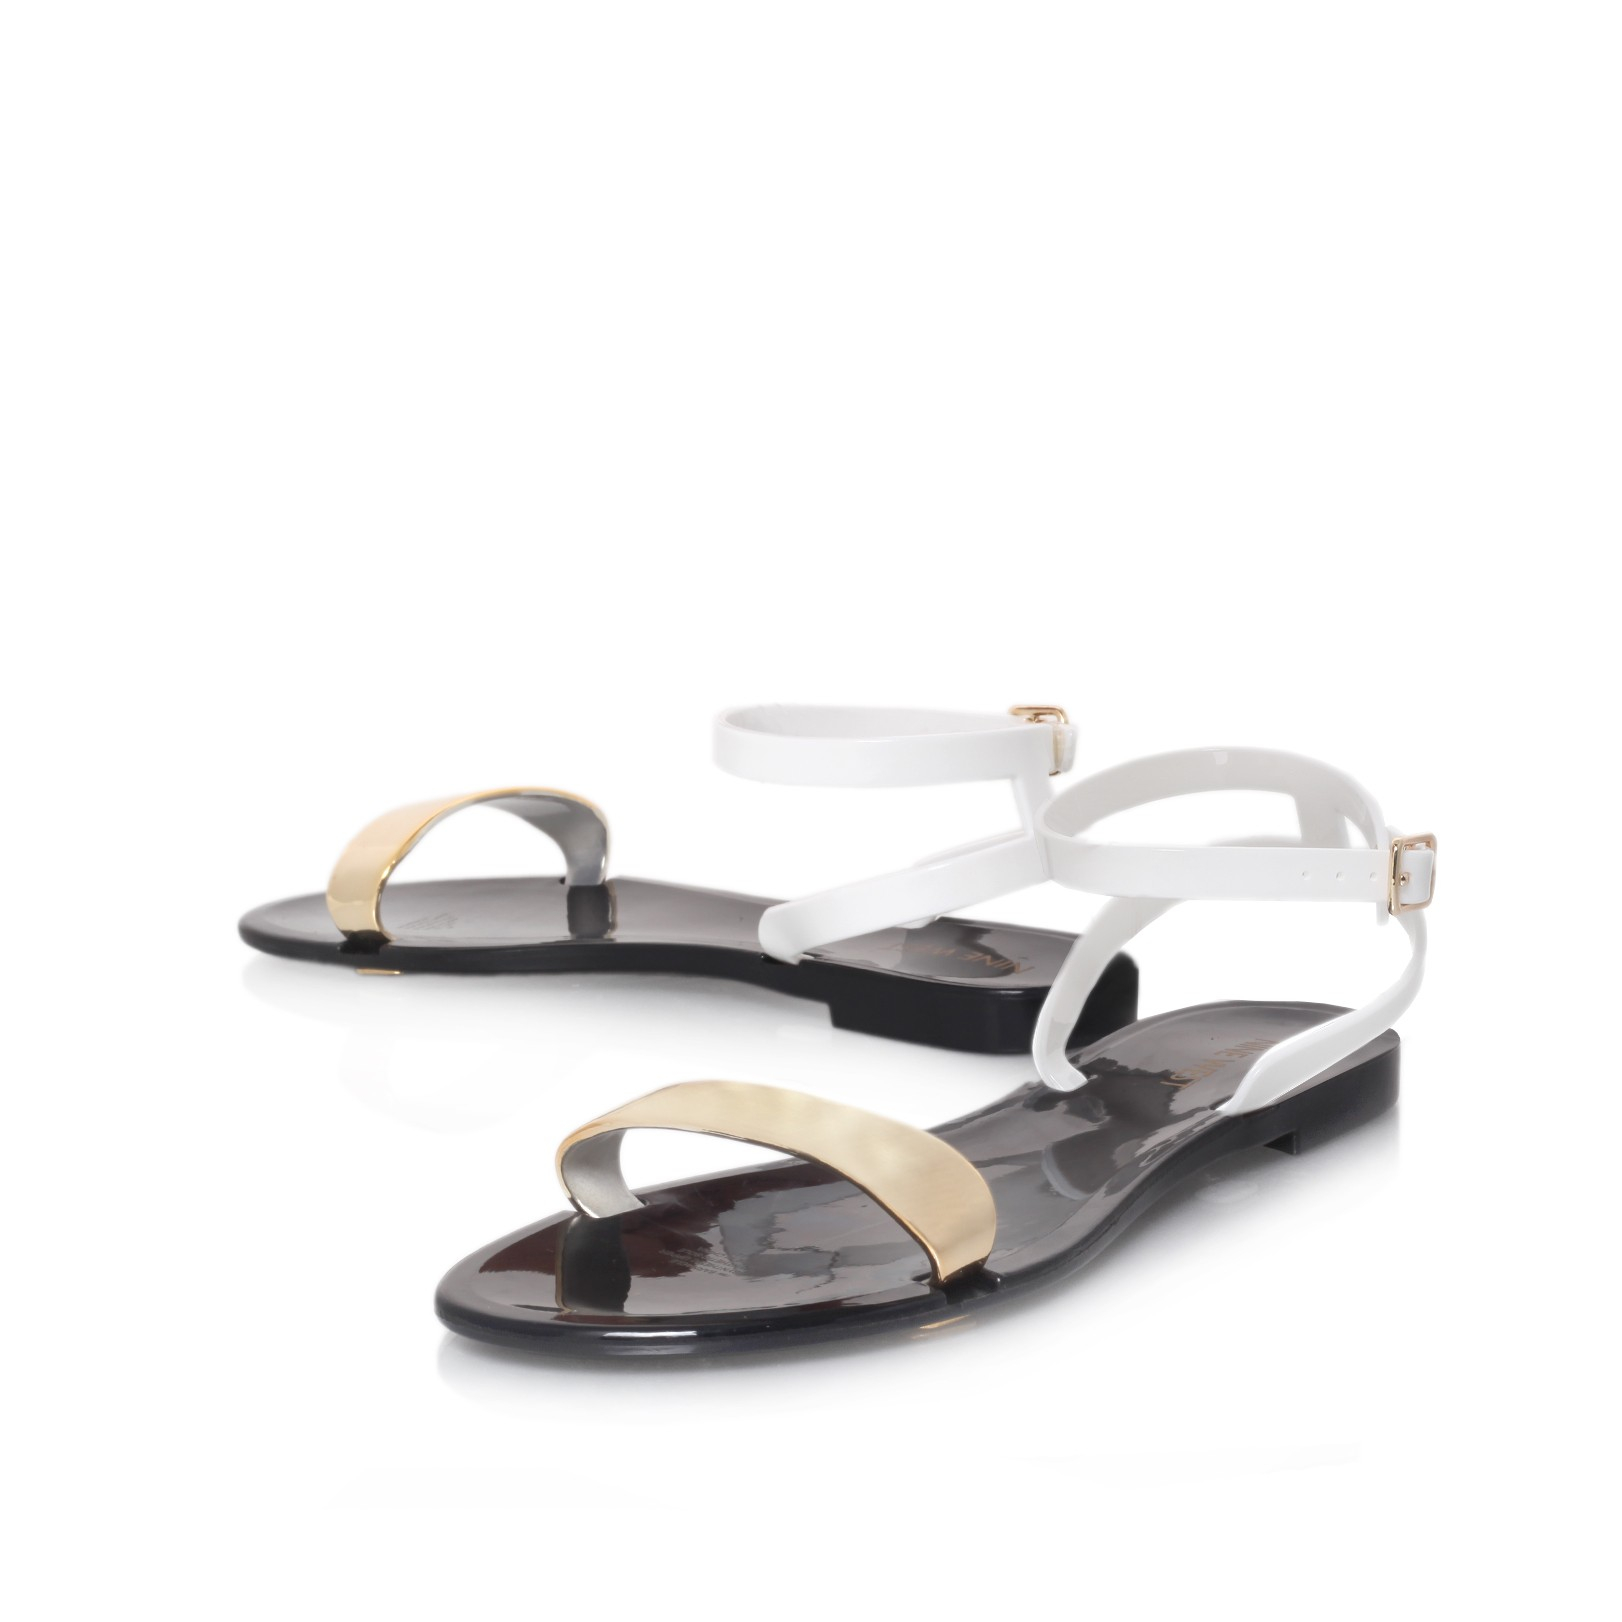 Nine west barnacle flat sandals. Sandals. Low (39mm and below). Upper ...